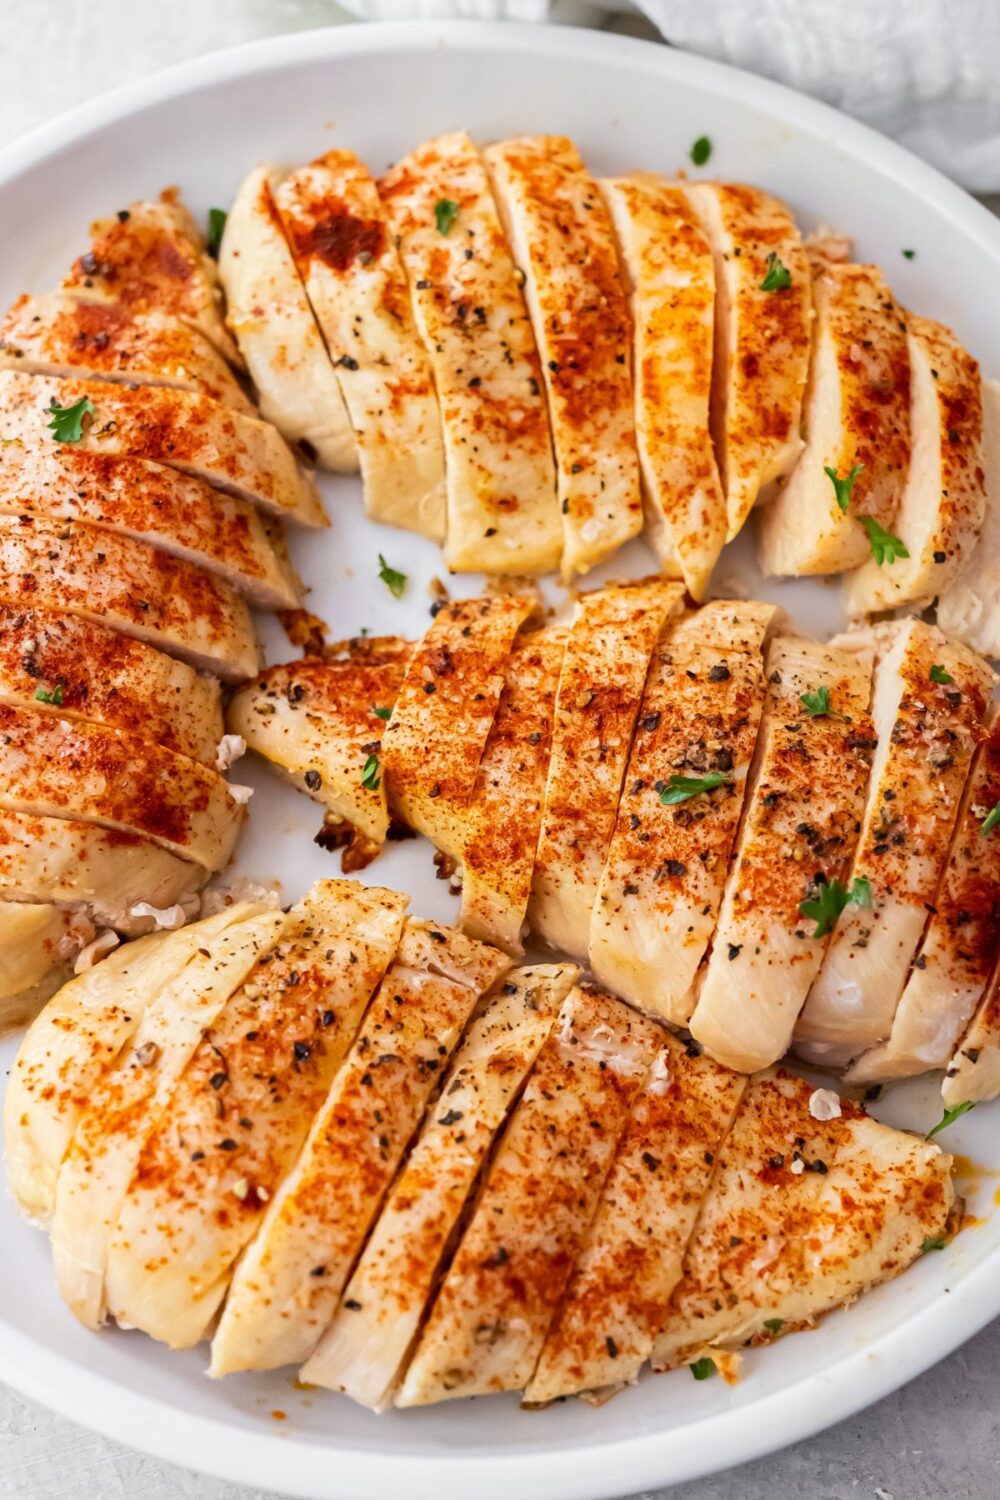 4 cooked and sliced 4 oz chicken breasts on a white plate